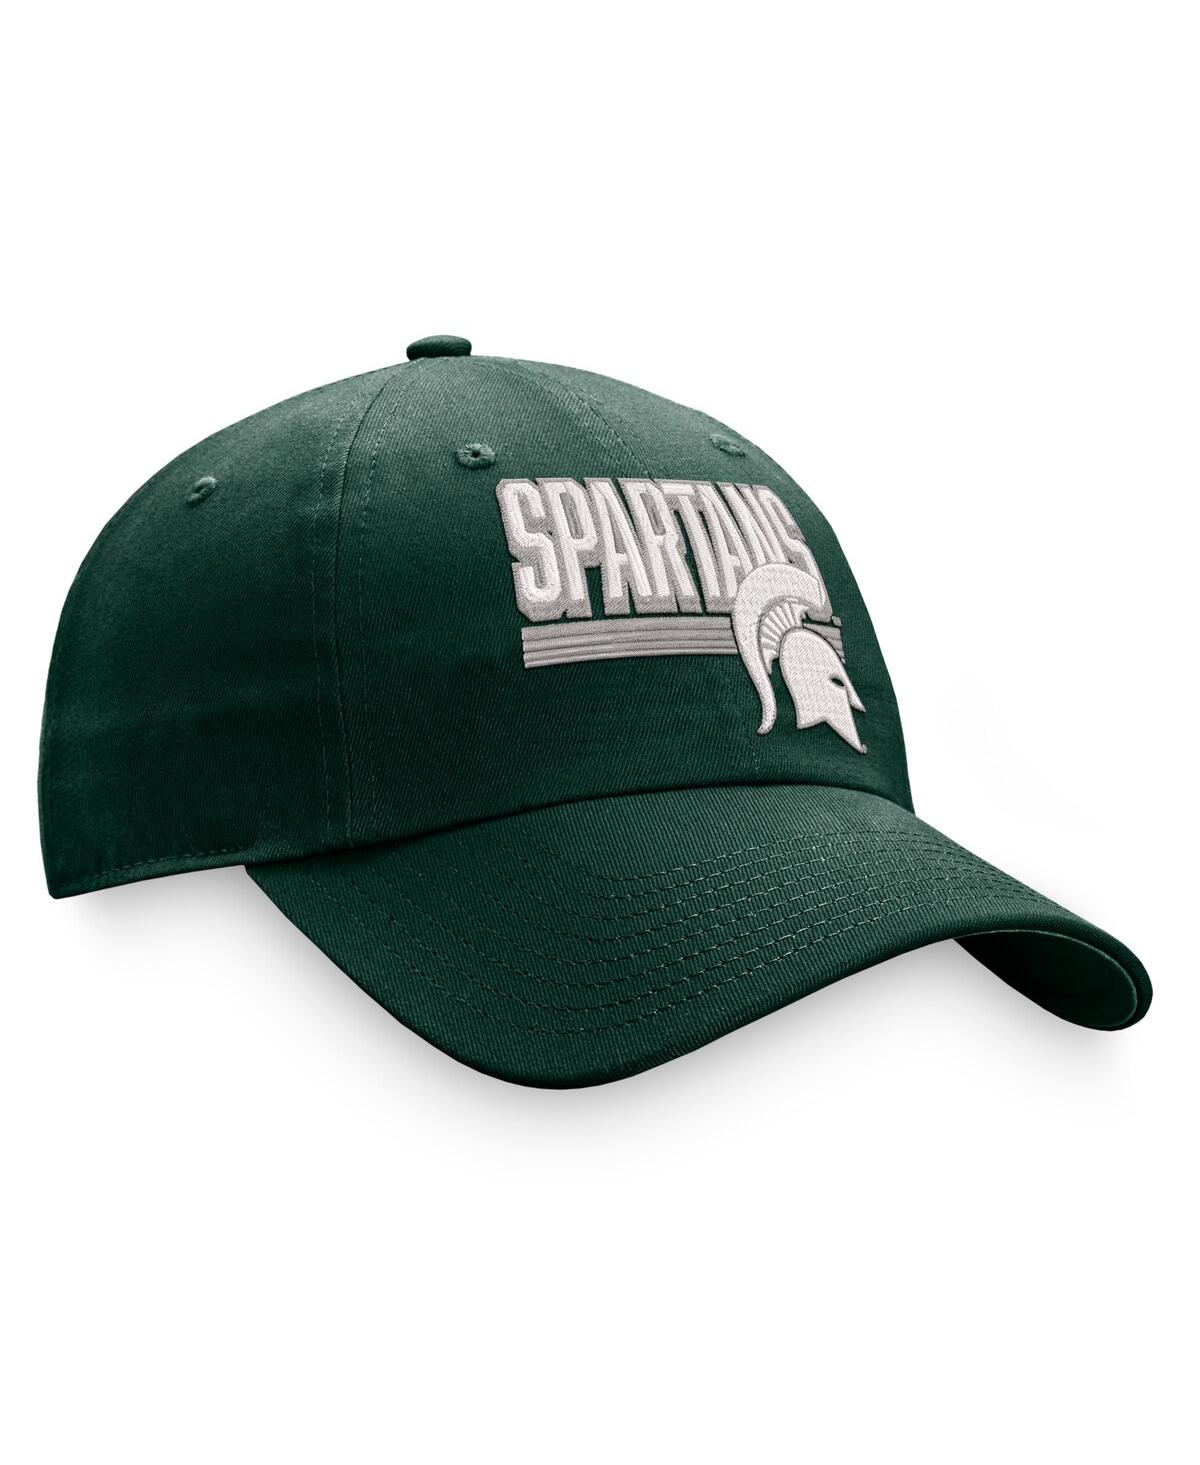 Shop Top Of The World Men's  Green Michigan State Spartans Slice Adjustable Hat